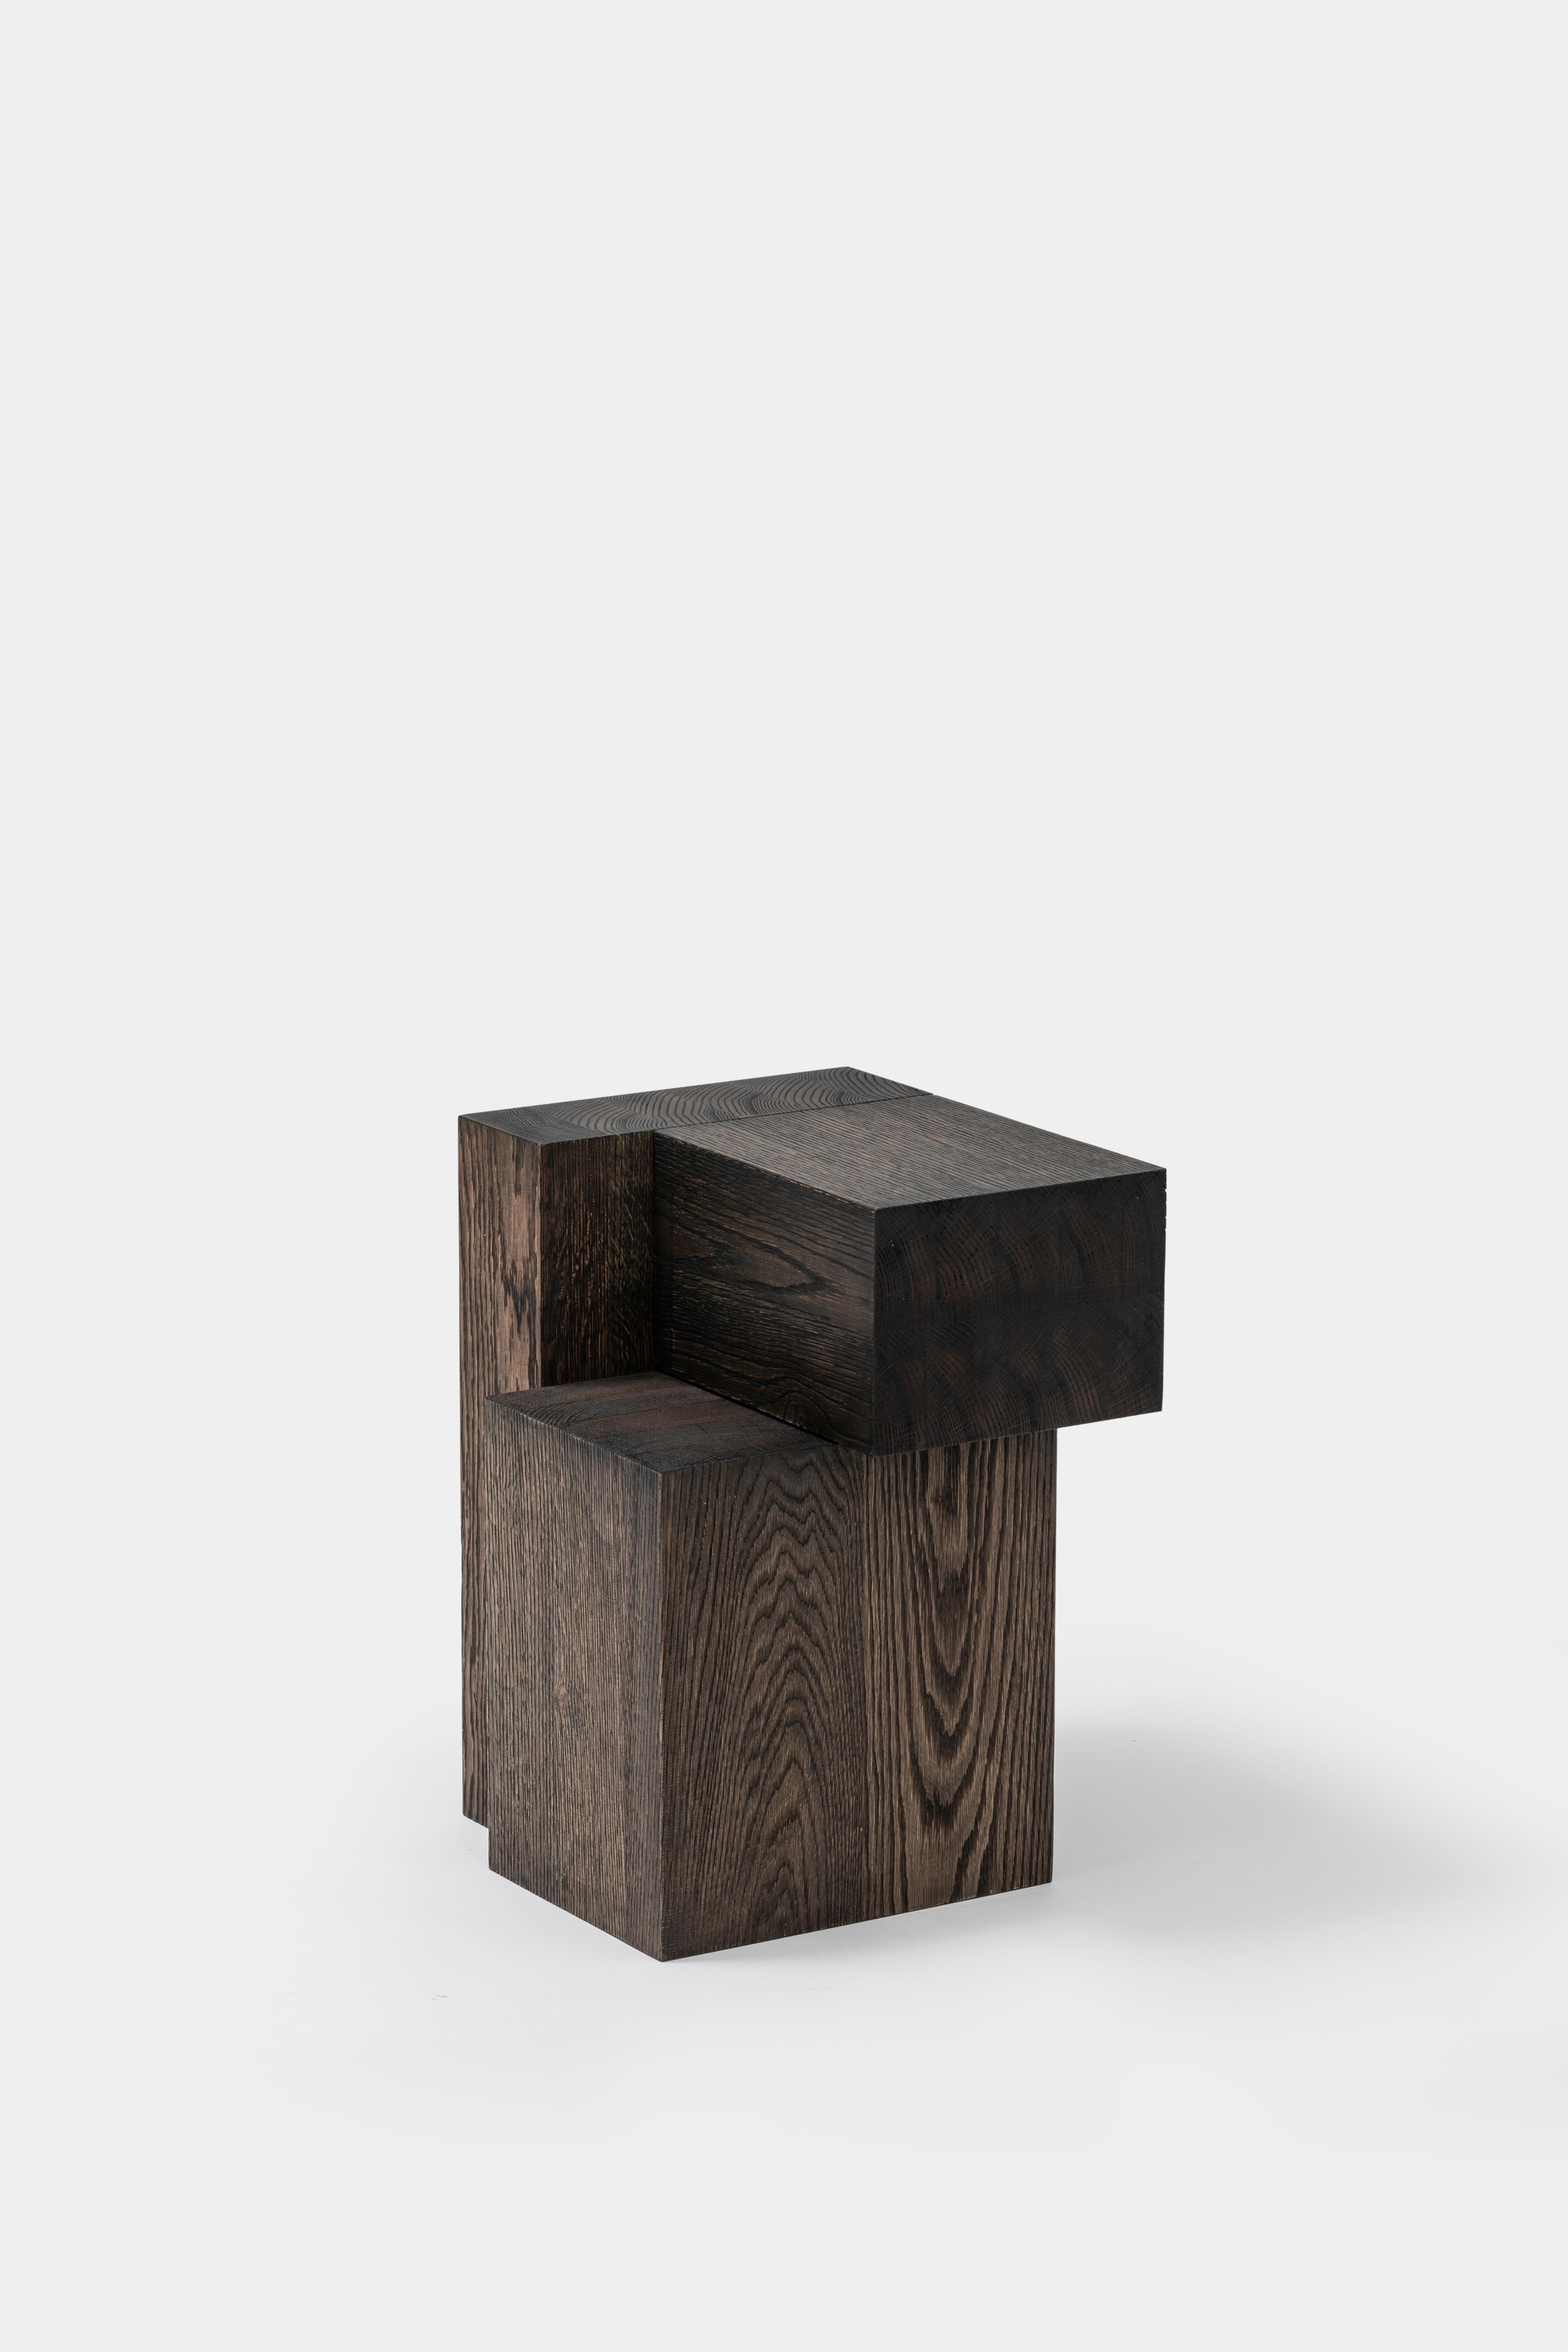 Layered oak wood stool by Hyungshin Hwang
Dimensions: D 33 x W 30 x H 42 cm
Materials: weathered oak

Layered Series is the main theme and concept of work of Hwang, who continues his experiment which is based on architectural composition of